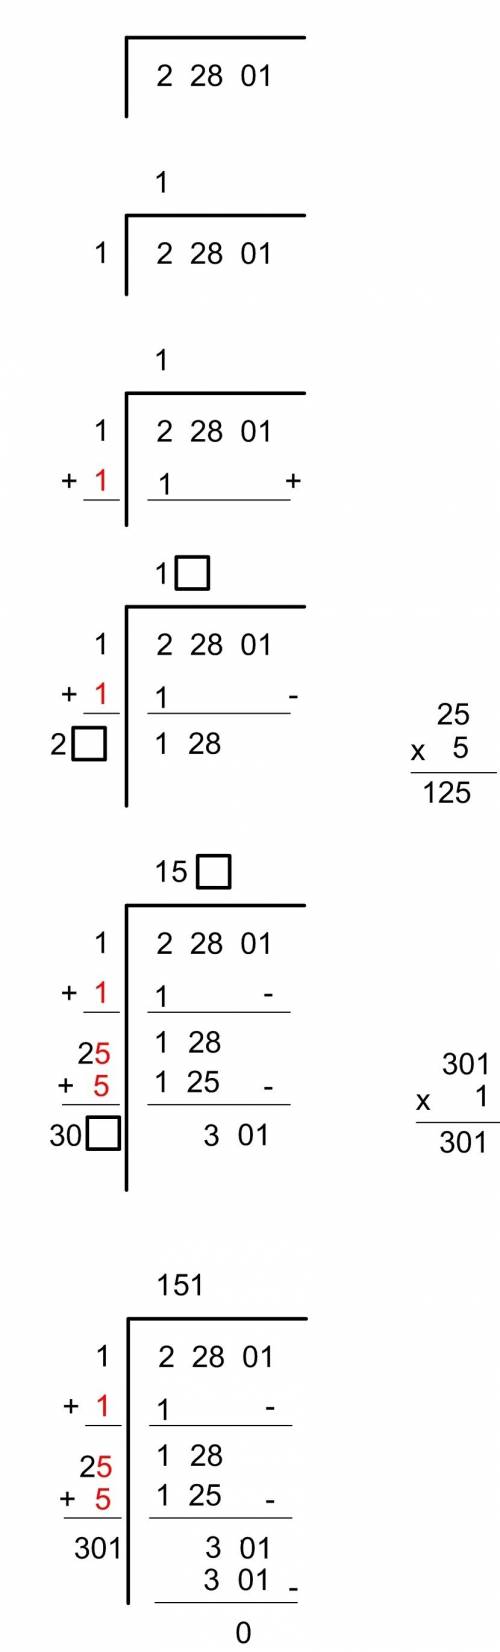 Square root of 22801 by long division method